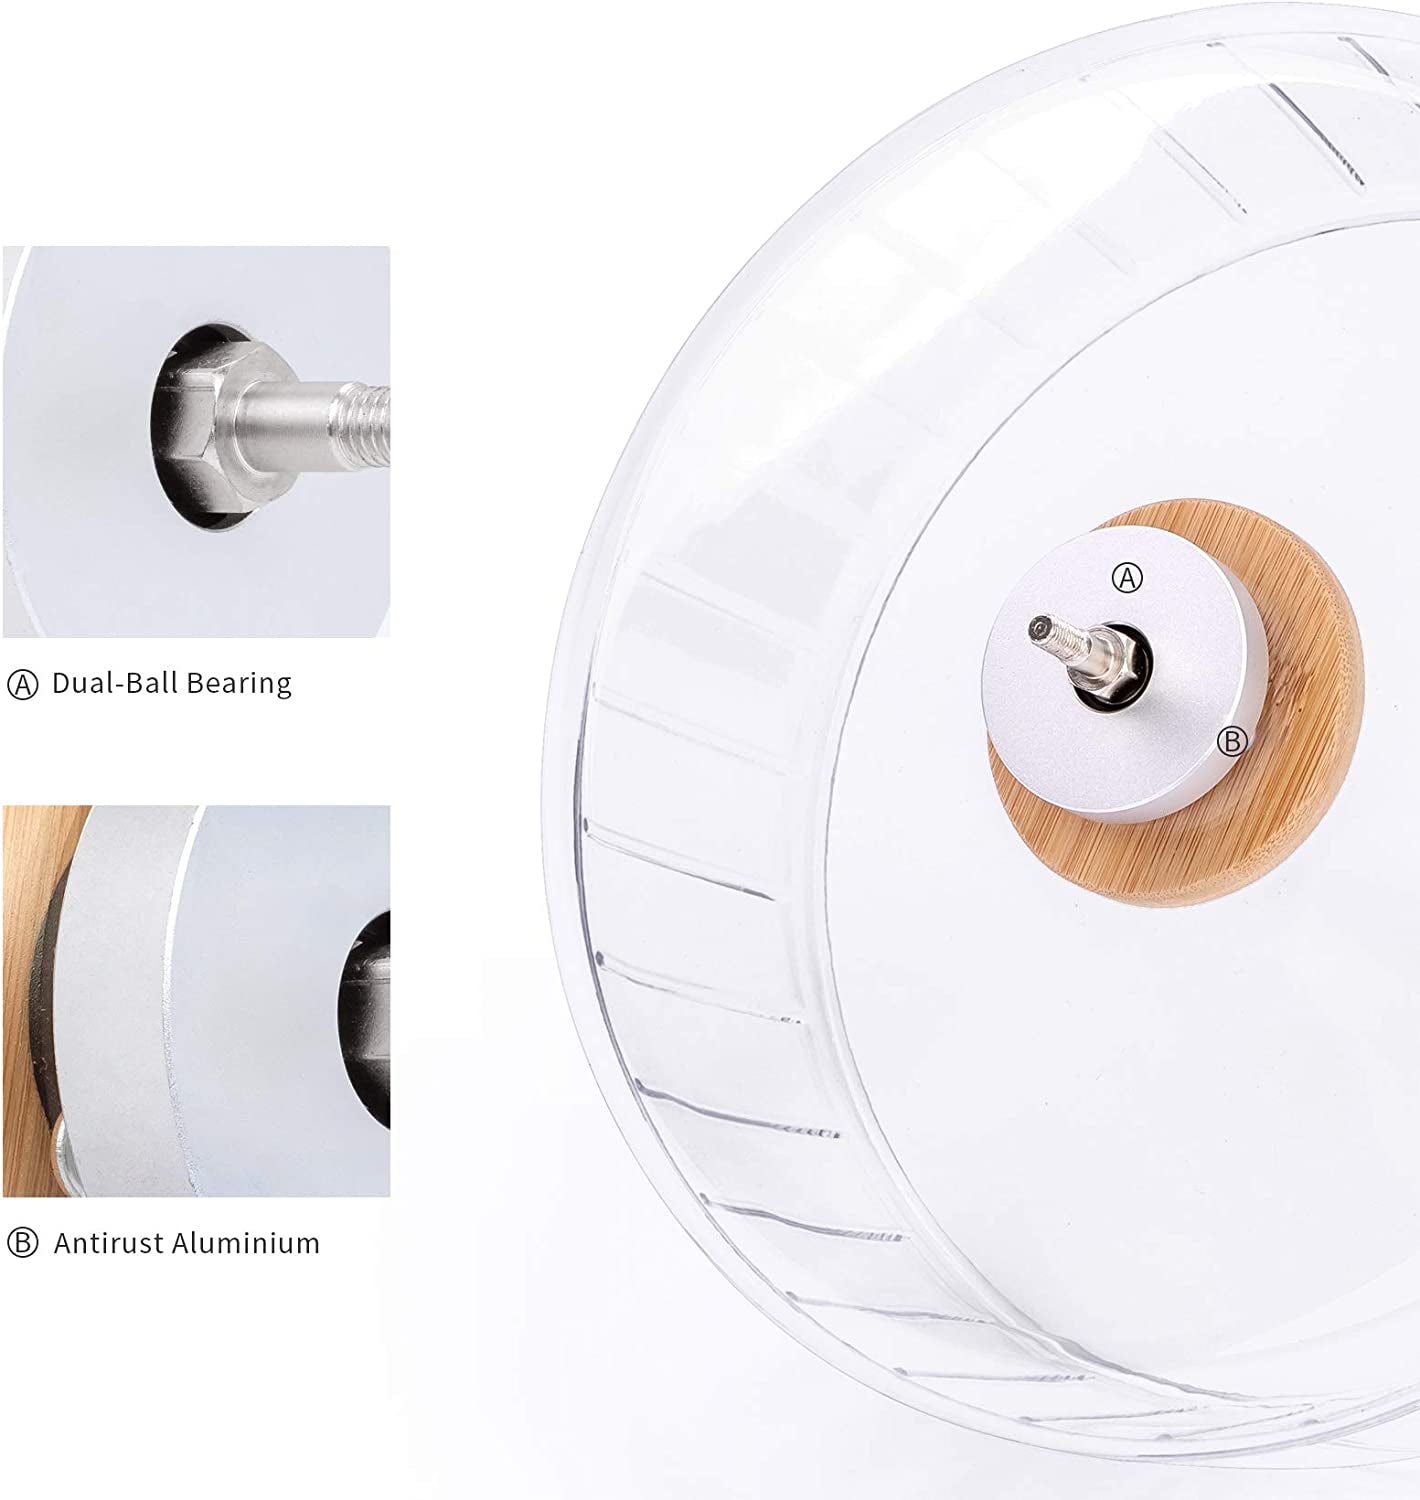 Super-Silent Hamster Exercise Wheels - Quiet Spinner Hamster Running Wheels with Adjustable Stand for Hamsters Gerbils Mice or Other Small Animals (M, Transparent)